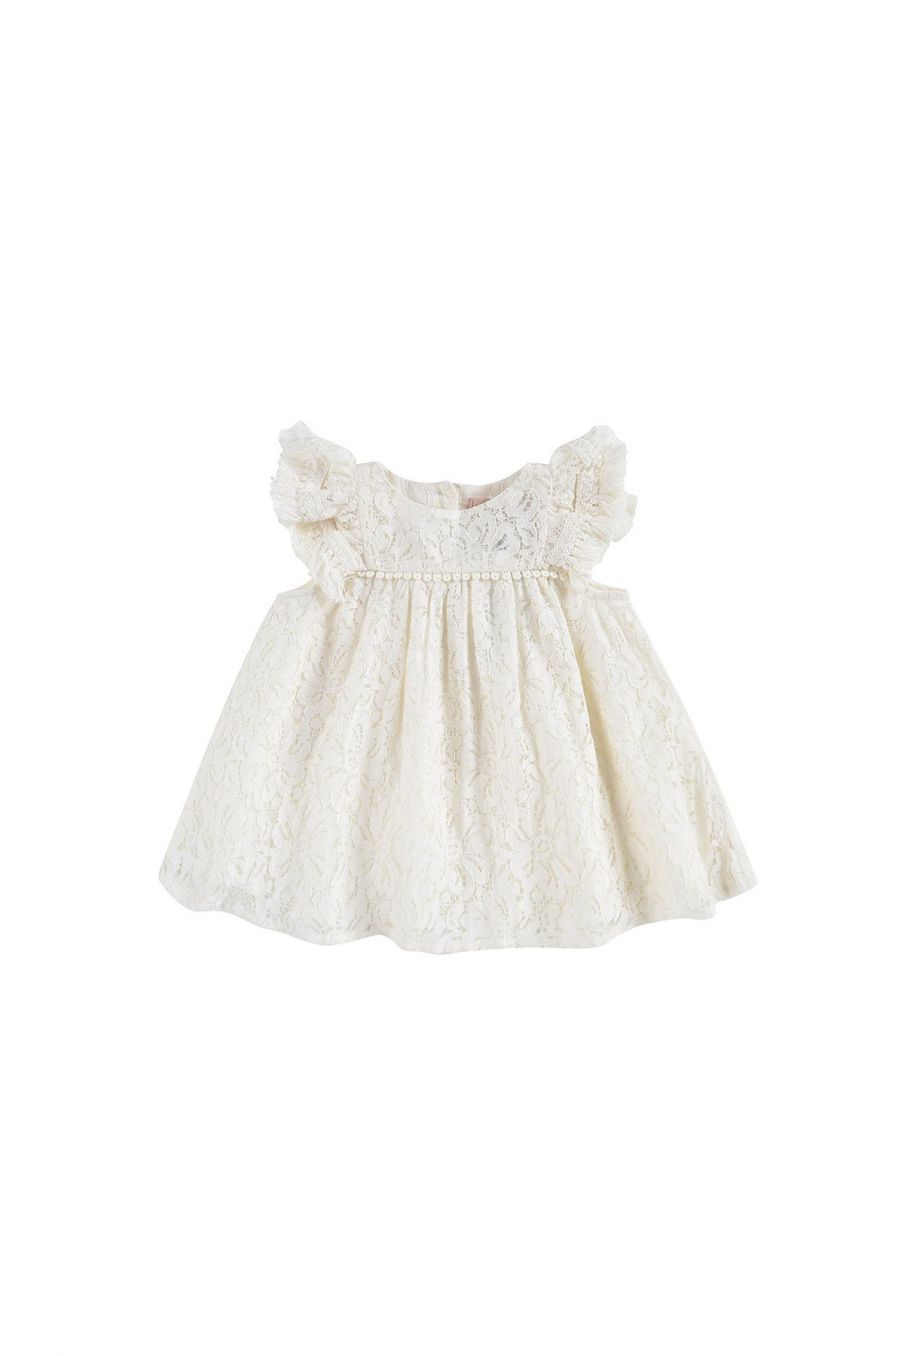 Bohemian chic - Vintage - Jacket for Baby Girl → Louise Misha